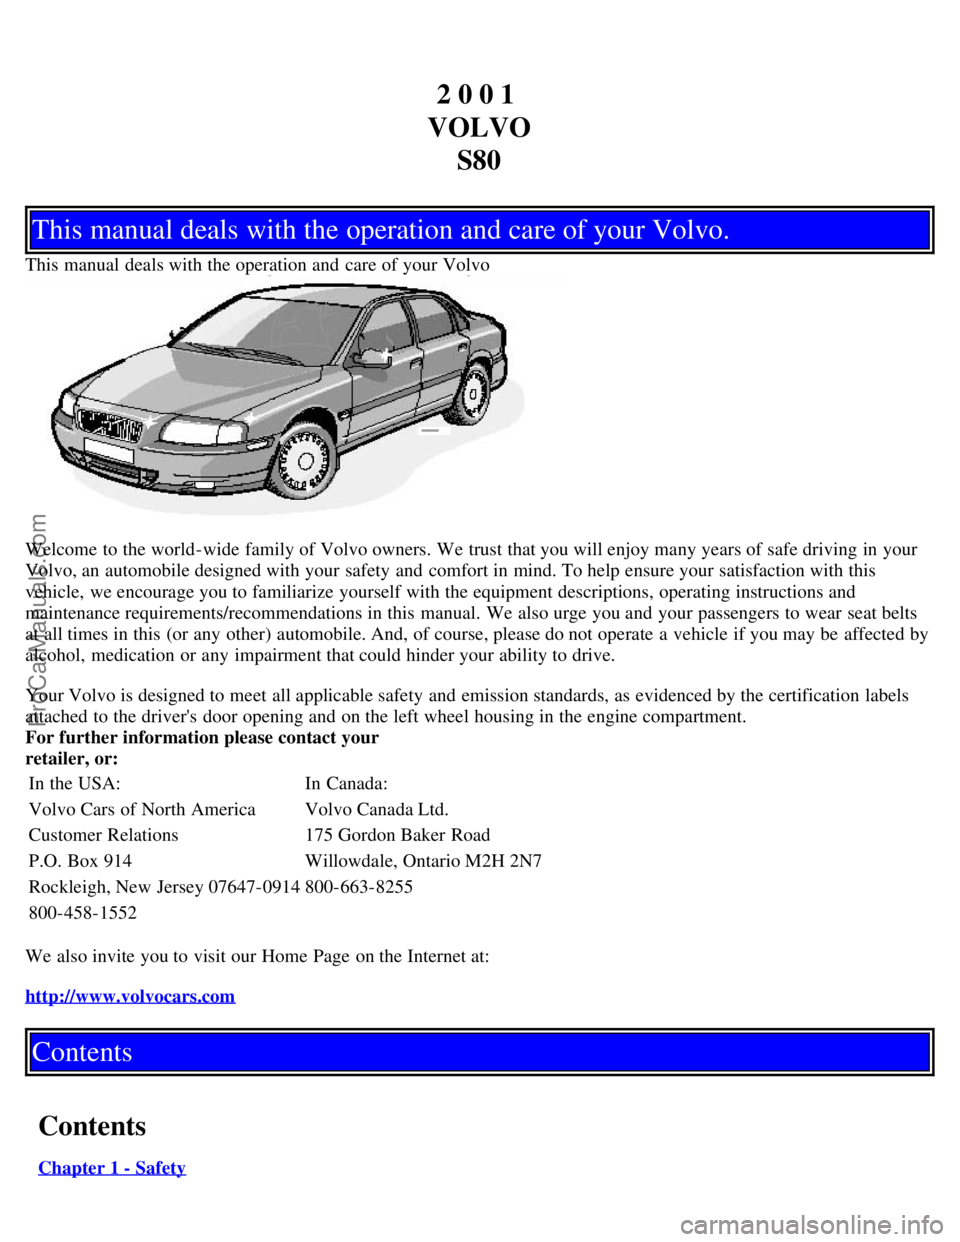 VOLVO S80 2001  Owners Manual 2 0 0 1 
VOLVO S80
This manual deals with the operation and care of your Volvo.
This manual  deals with the operation and  care of your Volvo
Welcome to the world-wide  family of Volvo owners. We trus